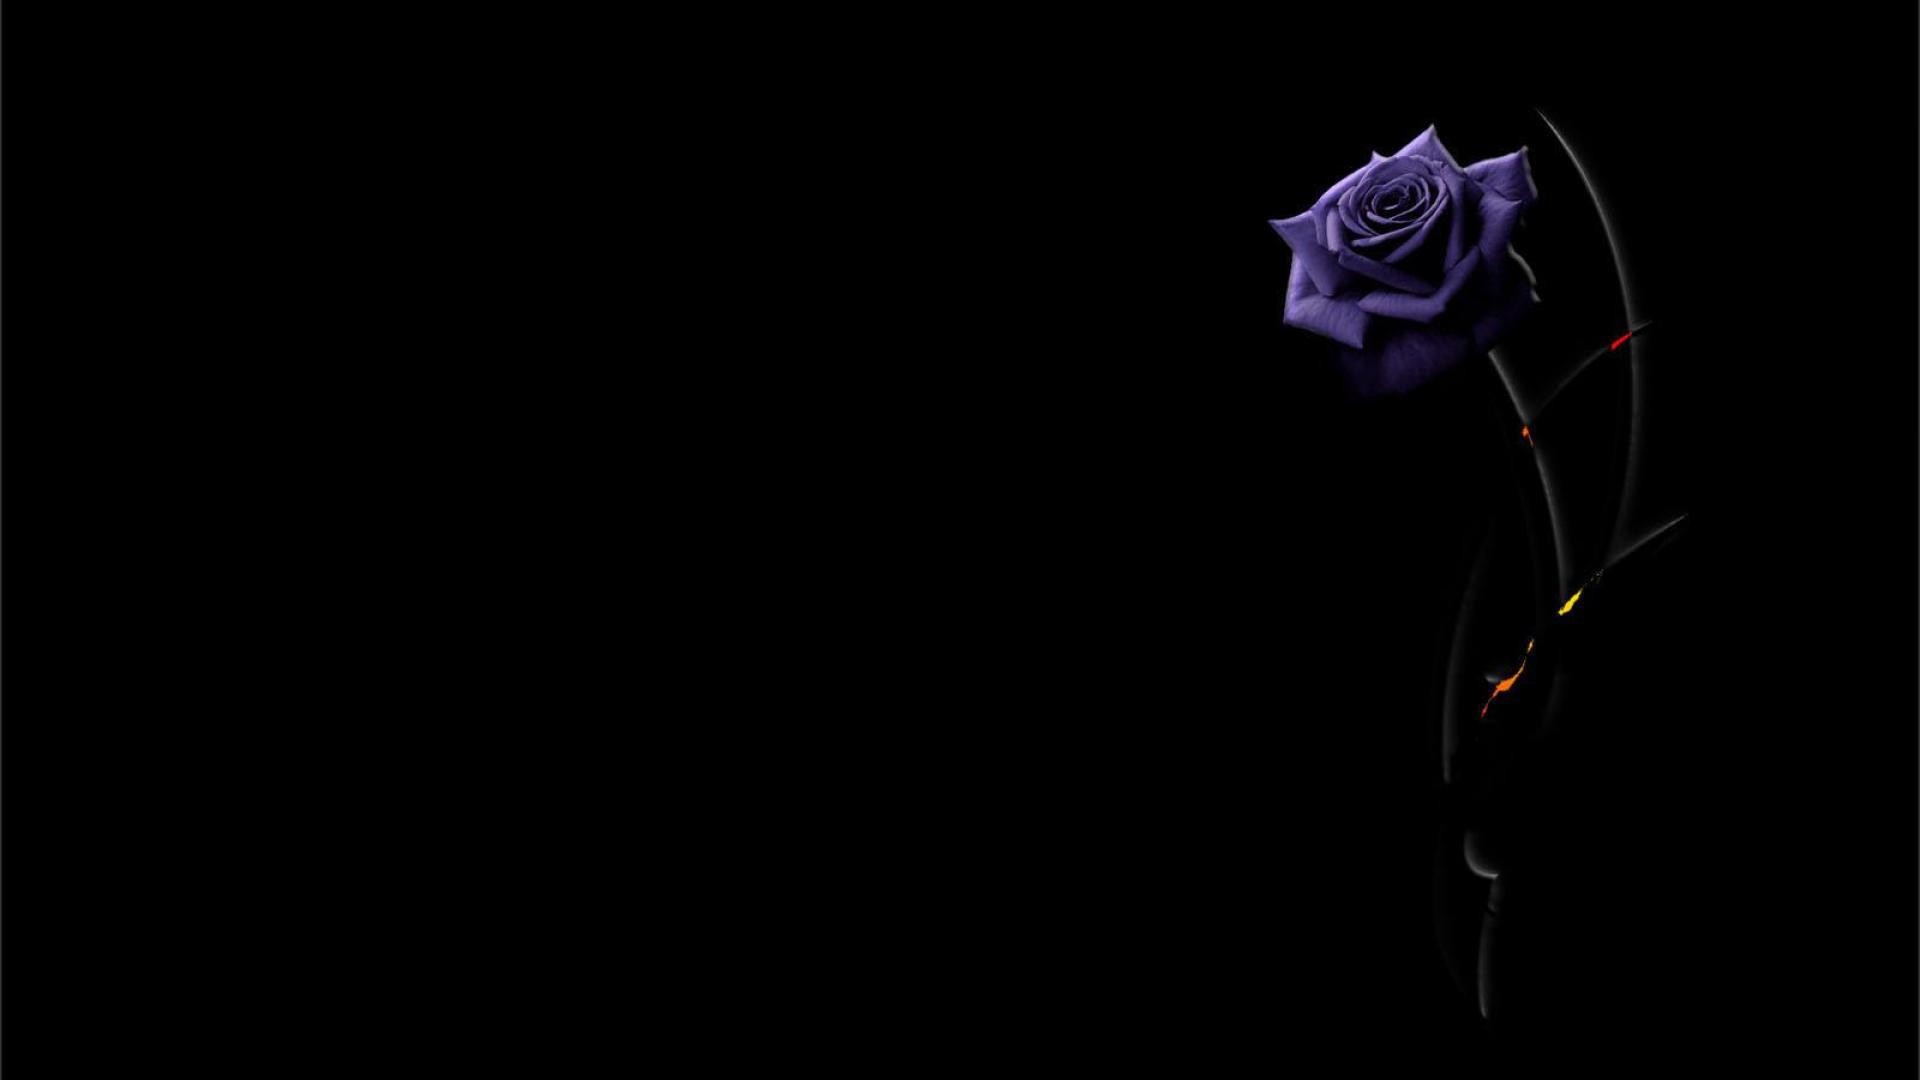 1920x1080 purple rose on a black background wallpapers and images - wallpapers .